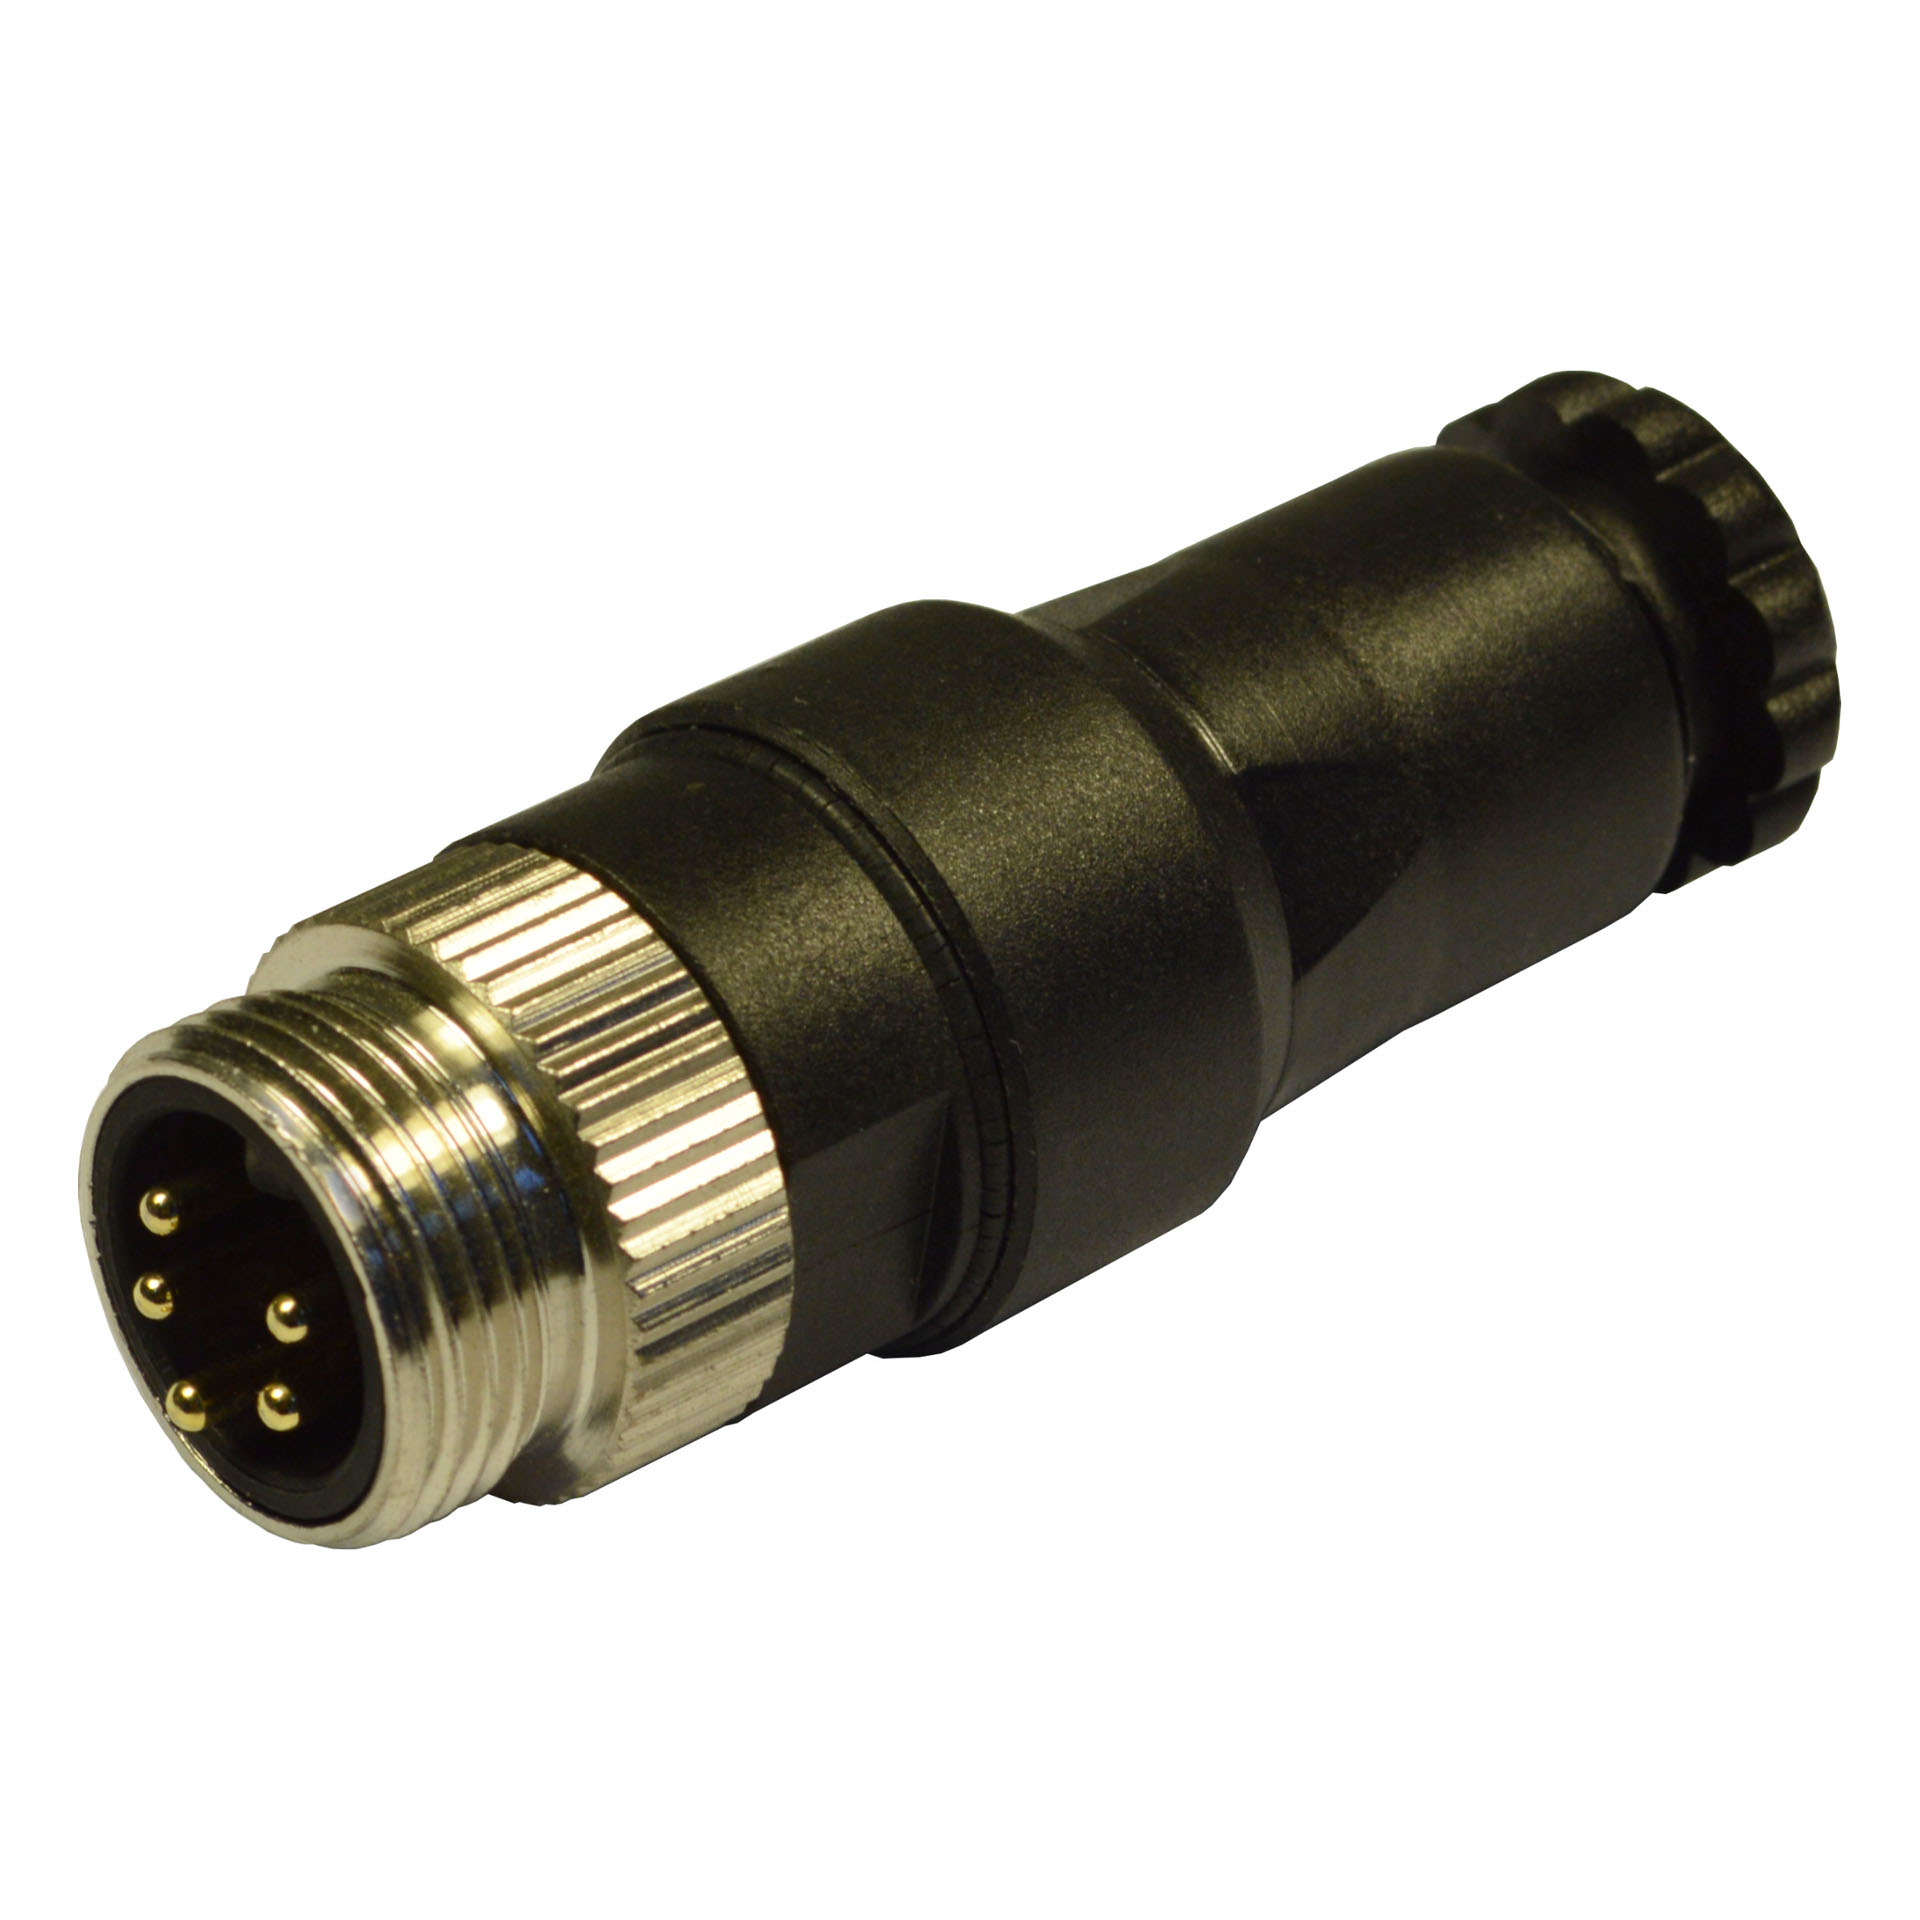 7/8" field attachable,male,180°,5p.,PG9/11unified